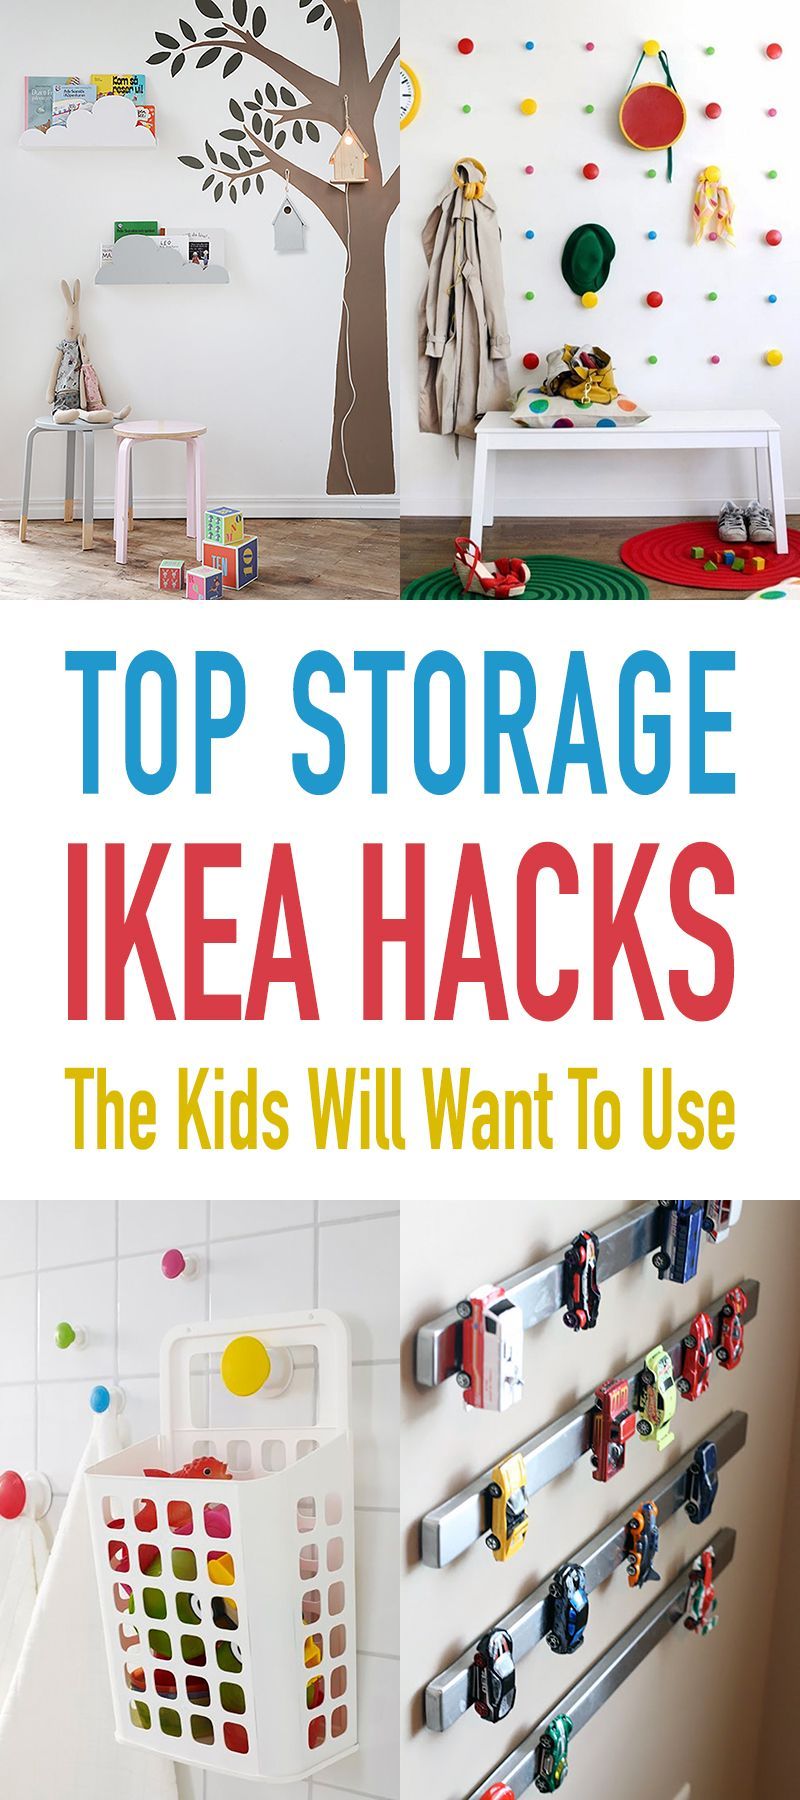 Toy Storage IKEA Hacks the Kids Will Want To Use -   18 diy projects For Boys ikea hacks
 ideas